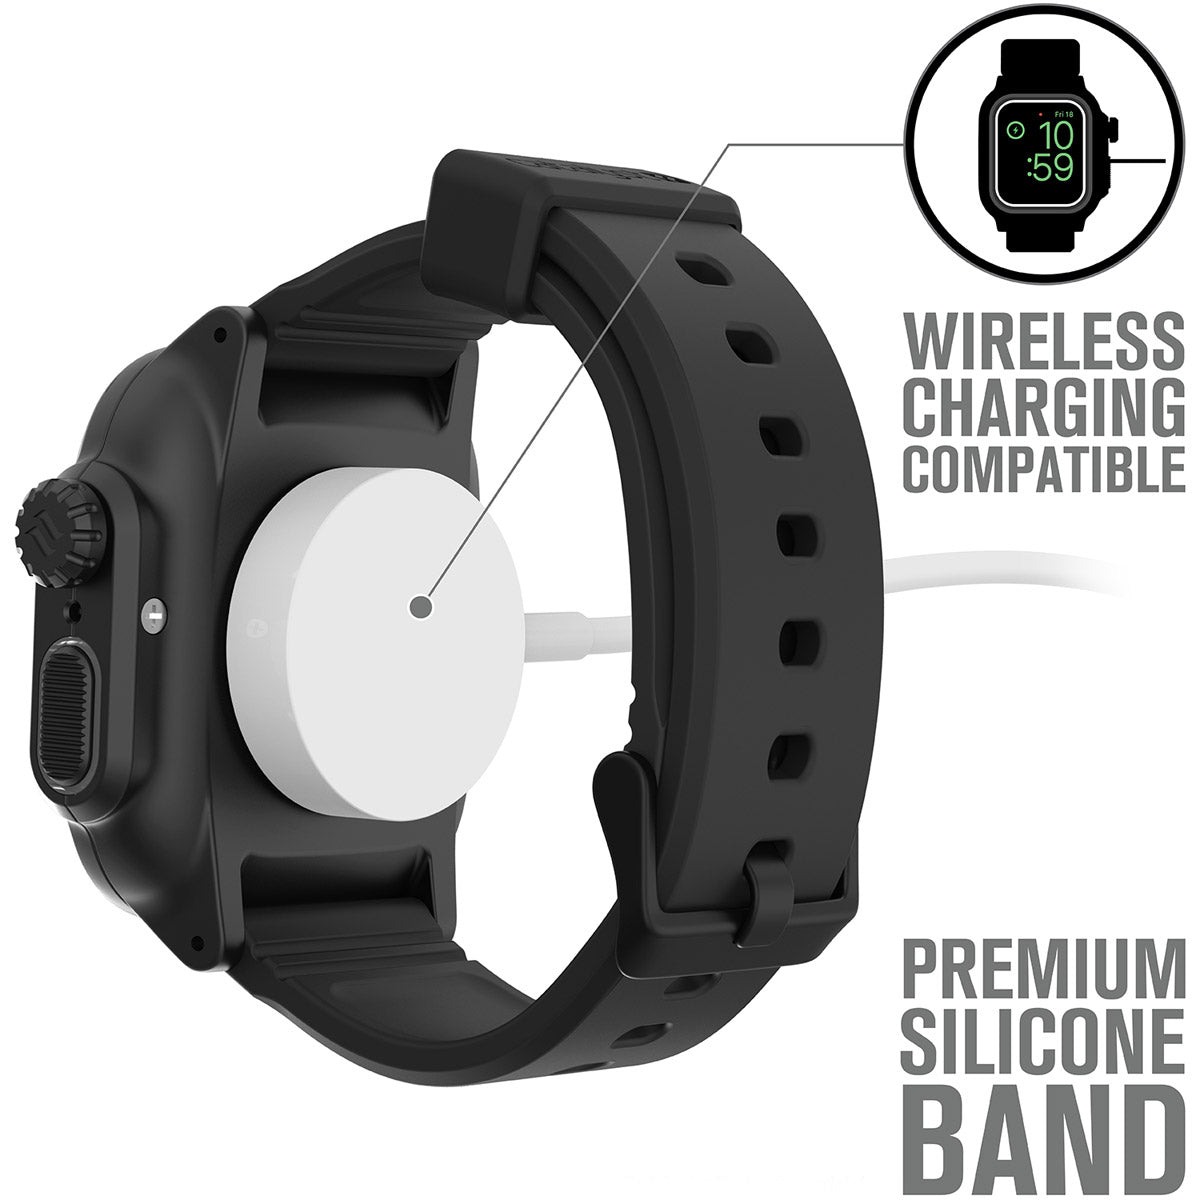 catalyst apple watch series 6 5 4 se gen 2 1 40mm 44mm waterproof case band stealth black  showing wireless charging compatibility text reads wireless charging compatible premium silicone band